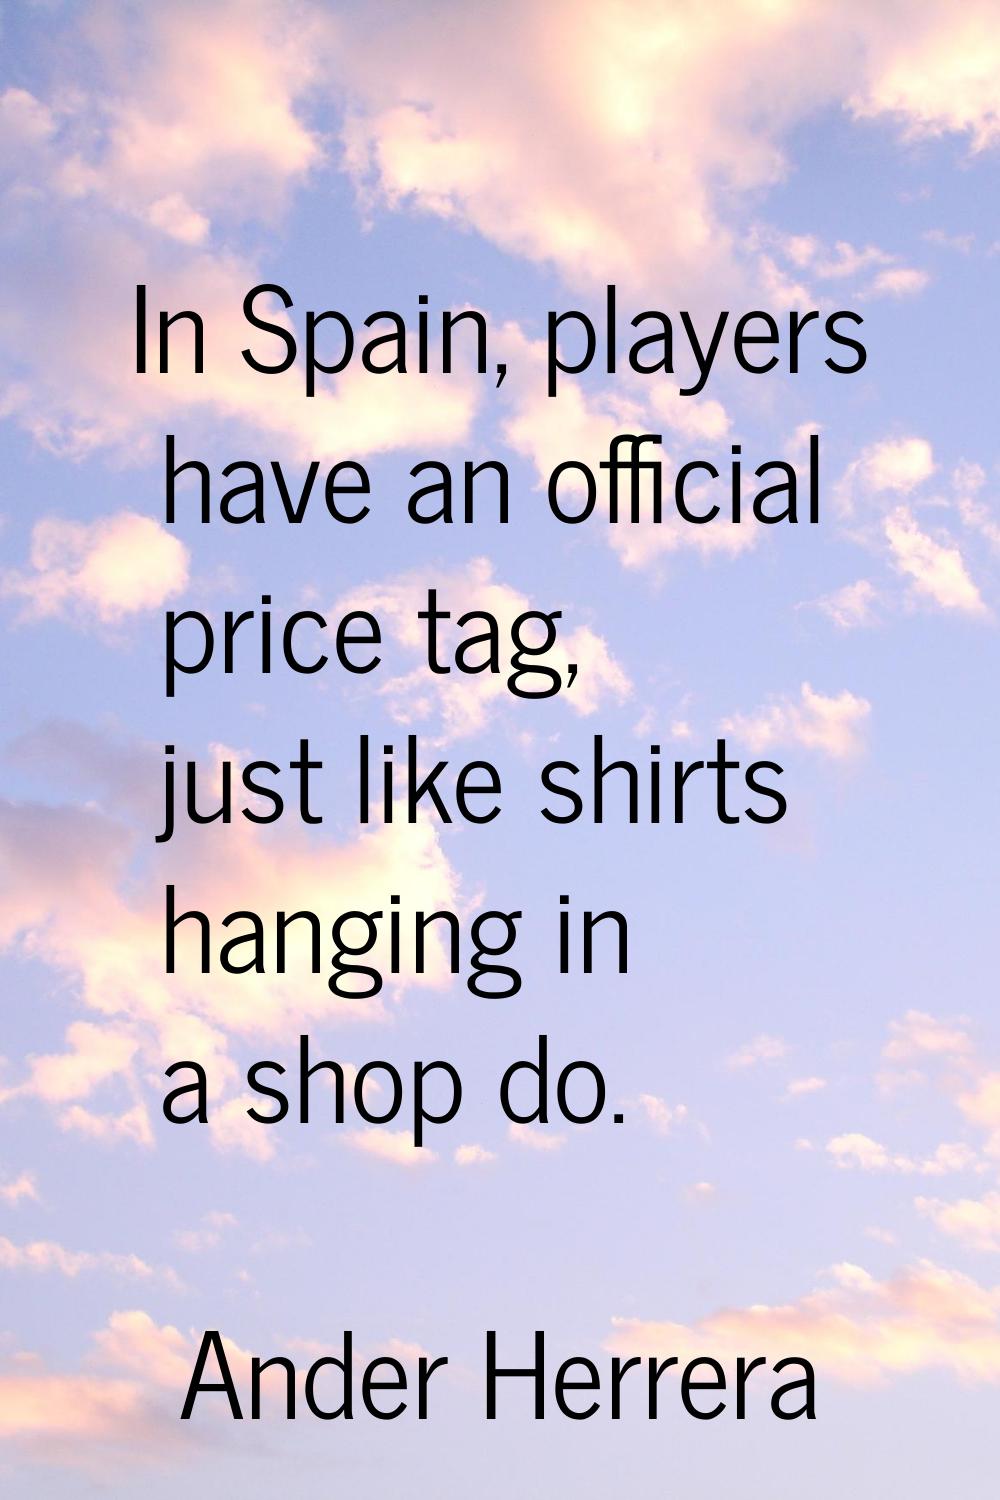 In Spain, players have an official price tag, just like shirts hanging in a shop do.